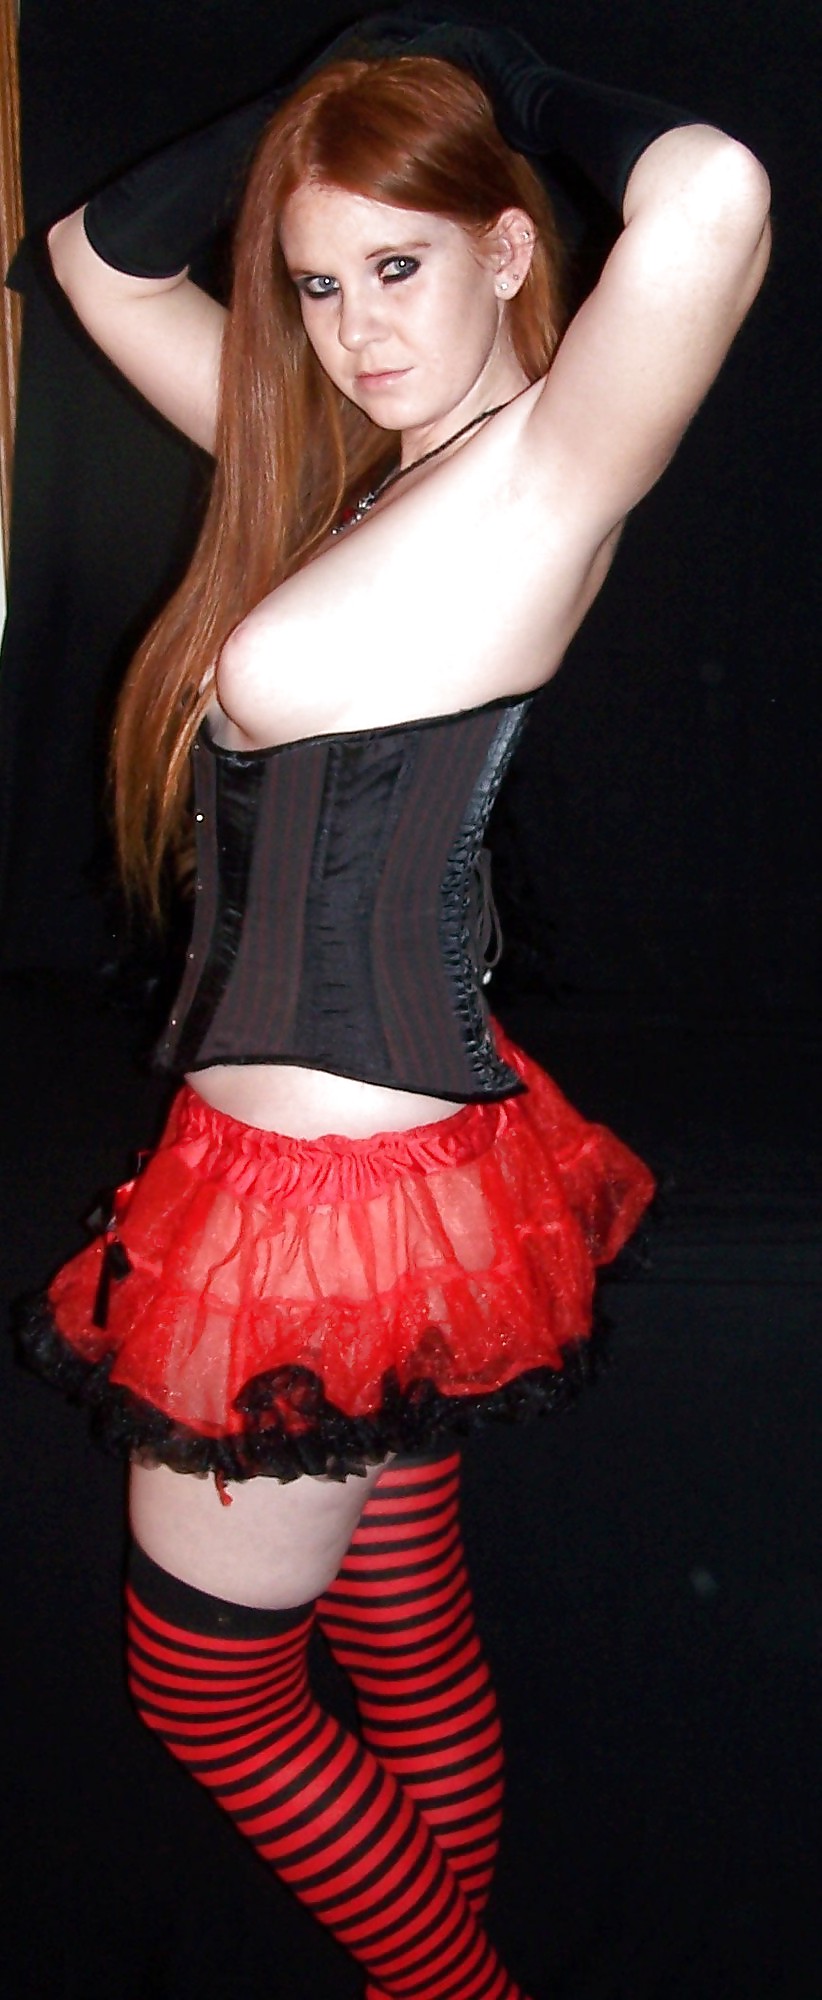 Sex BUSTY REDHEAD GOTHIC TEEN image